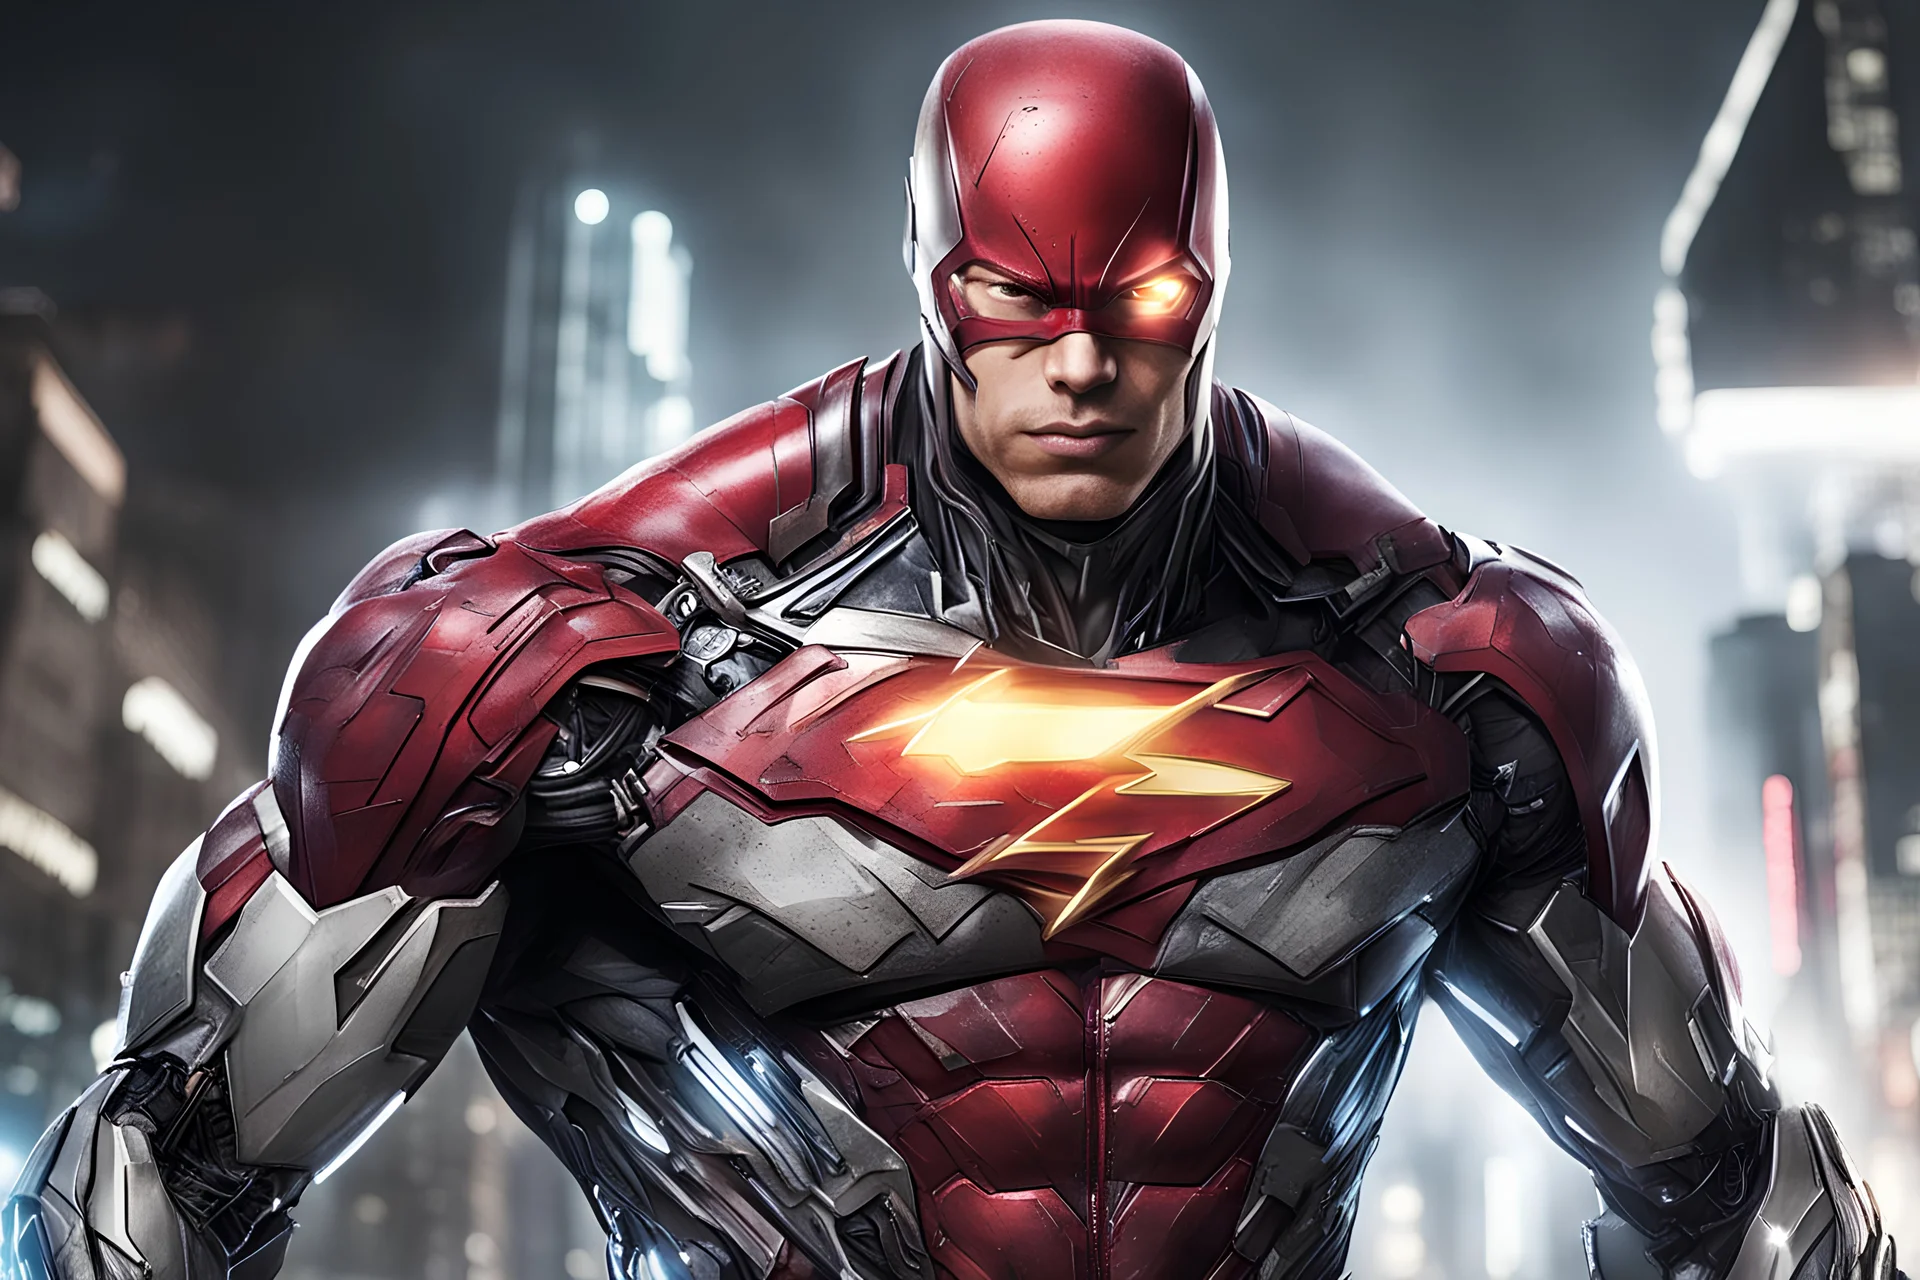 The Flash mixed with Cyborg mixed with Batman